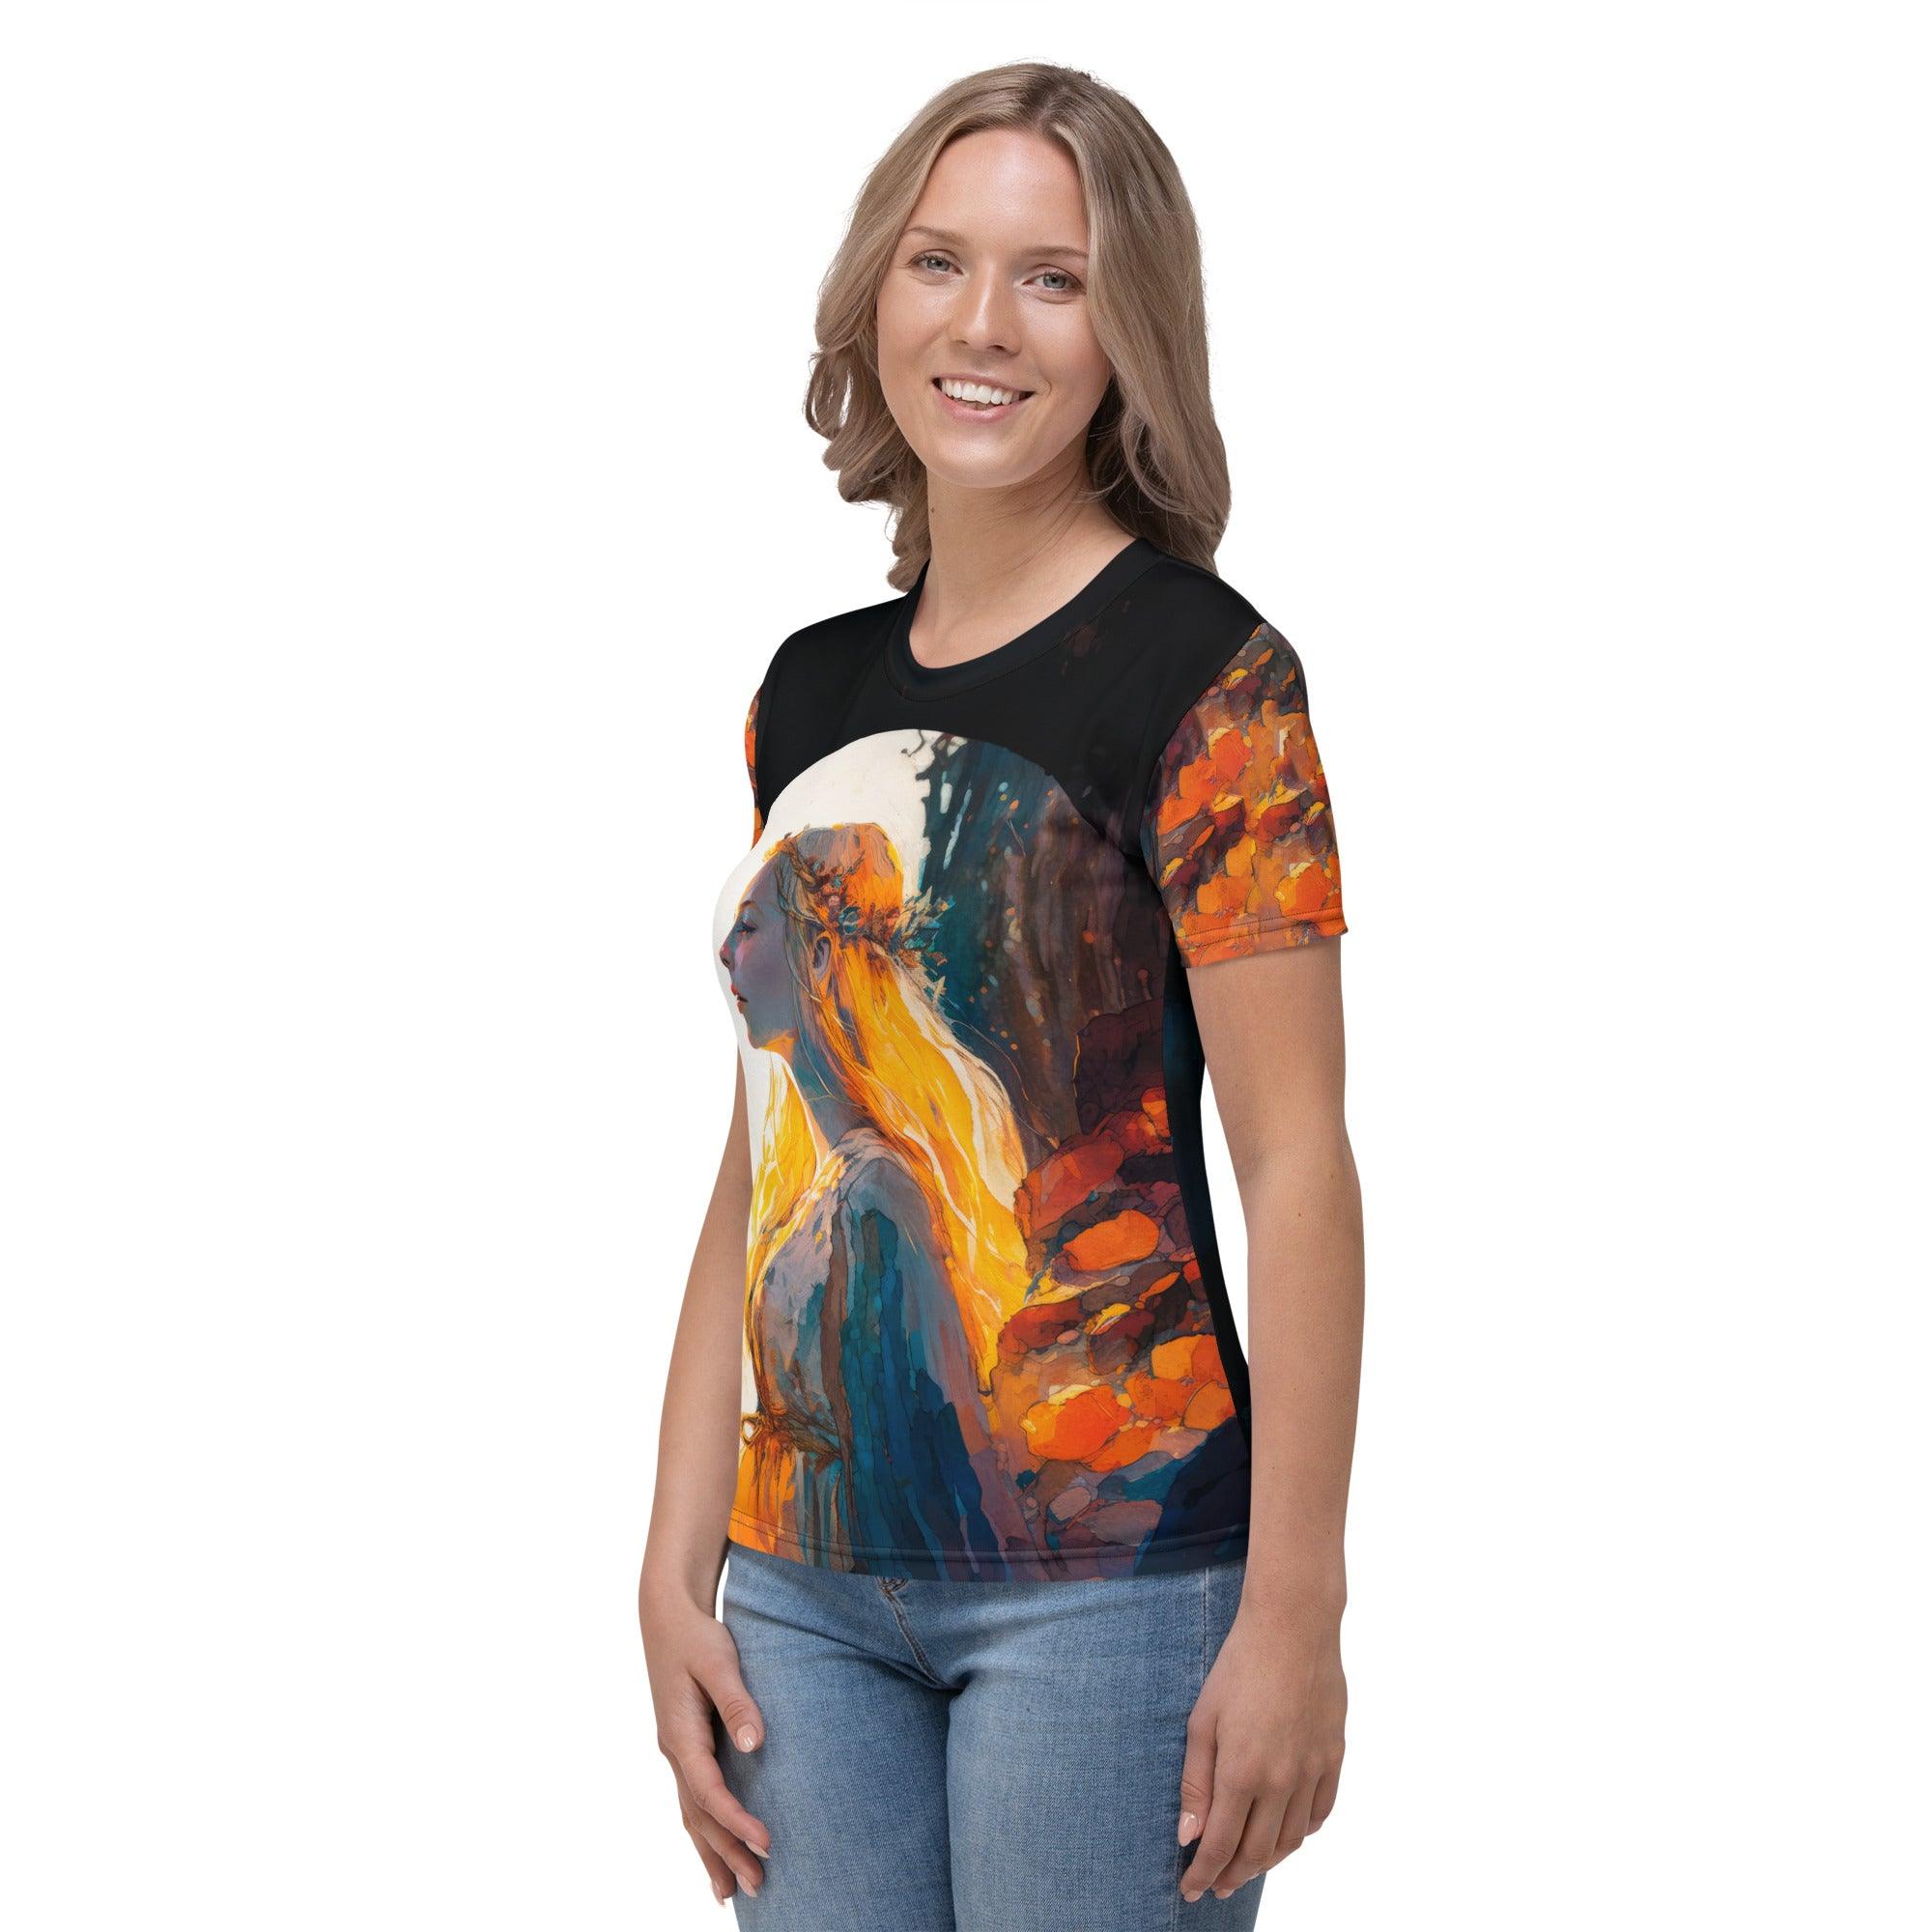 Harmony Groove All-Over Print Women's Music T-Shirt - Beyond T-shirts